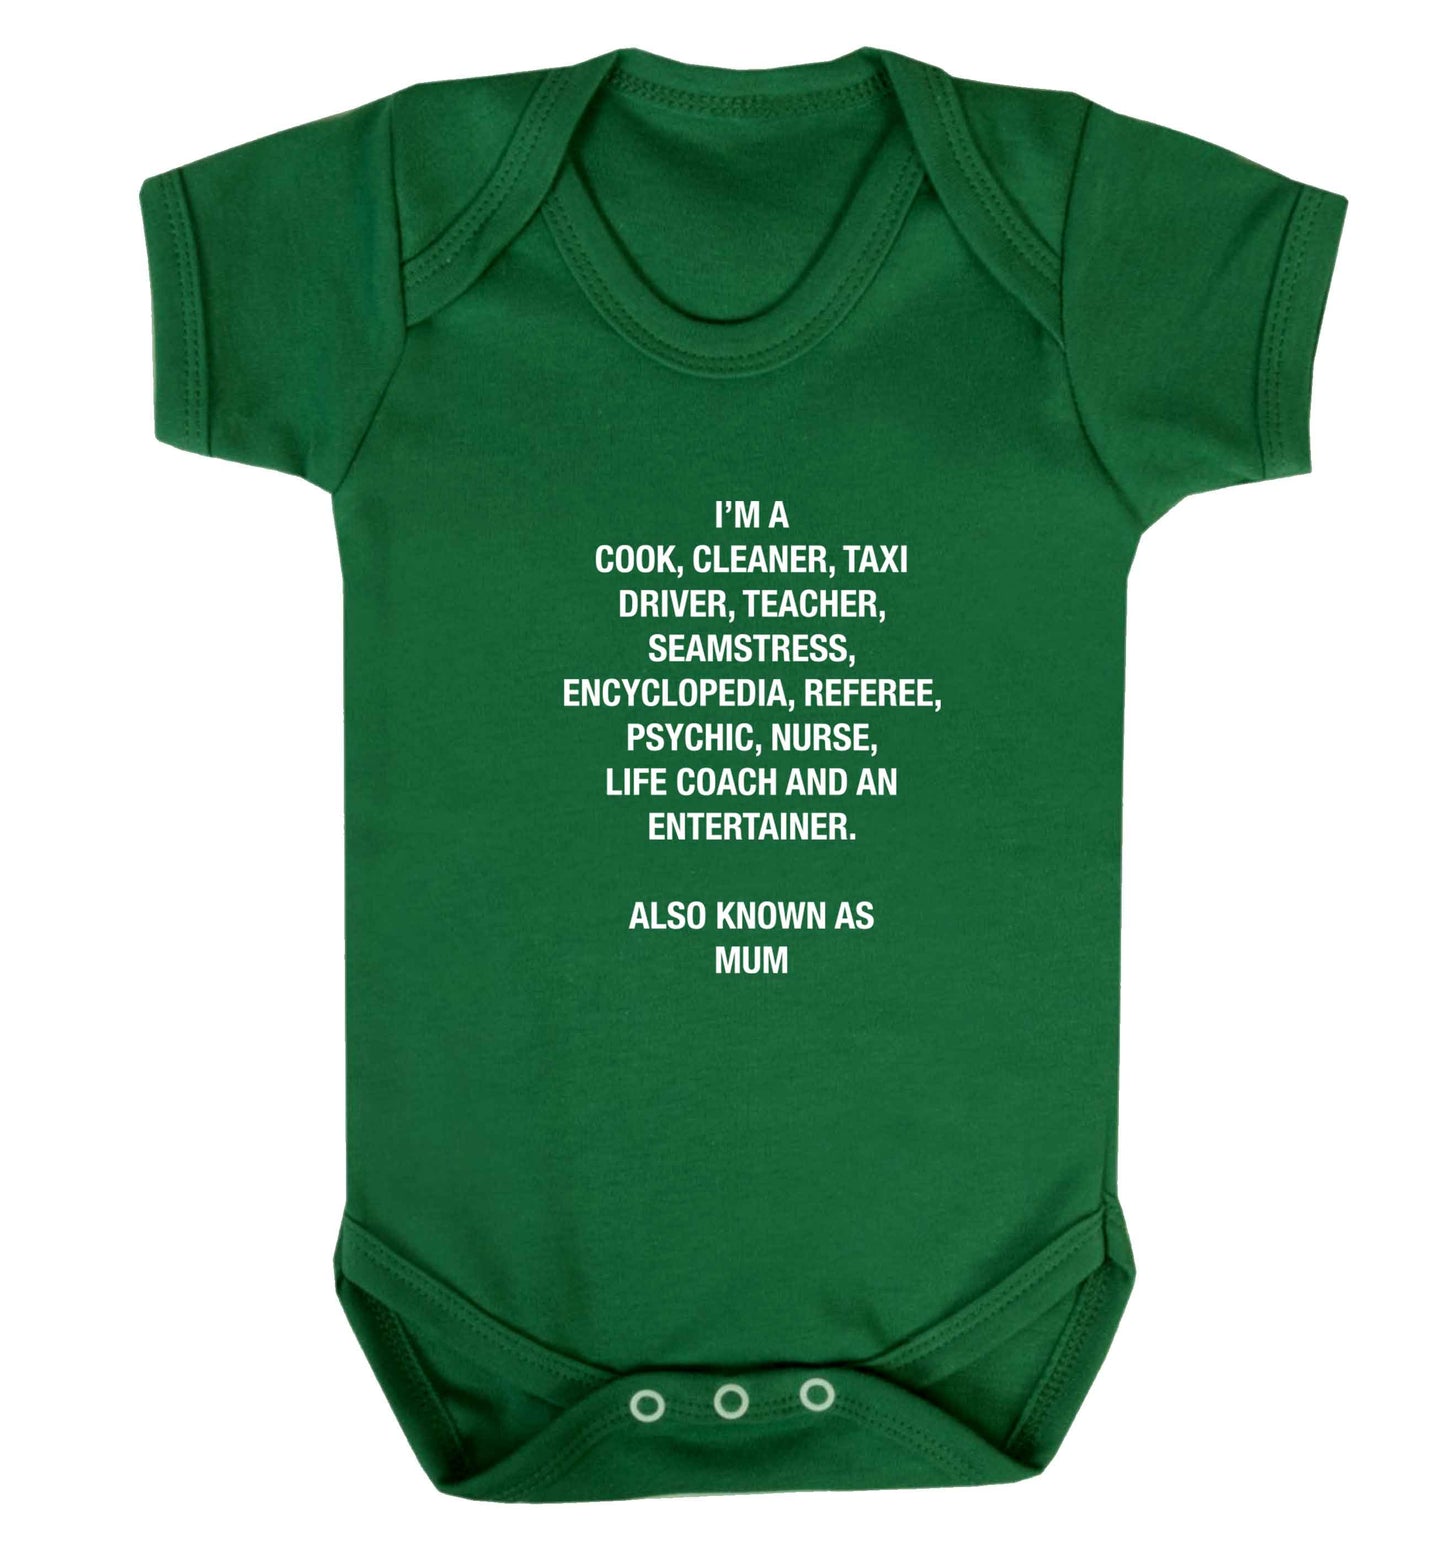 Funny gifts for your mum on mother's dayor her birthday! Mum, cook, cleaner, taxi driver, teacher, seamstress, encyclopedia, referee, psychic, nurse, life coach and entertainer baby vest green 18-24 months